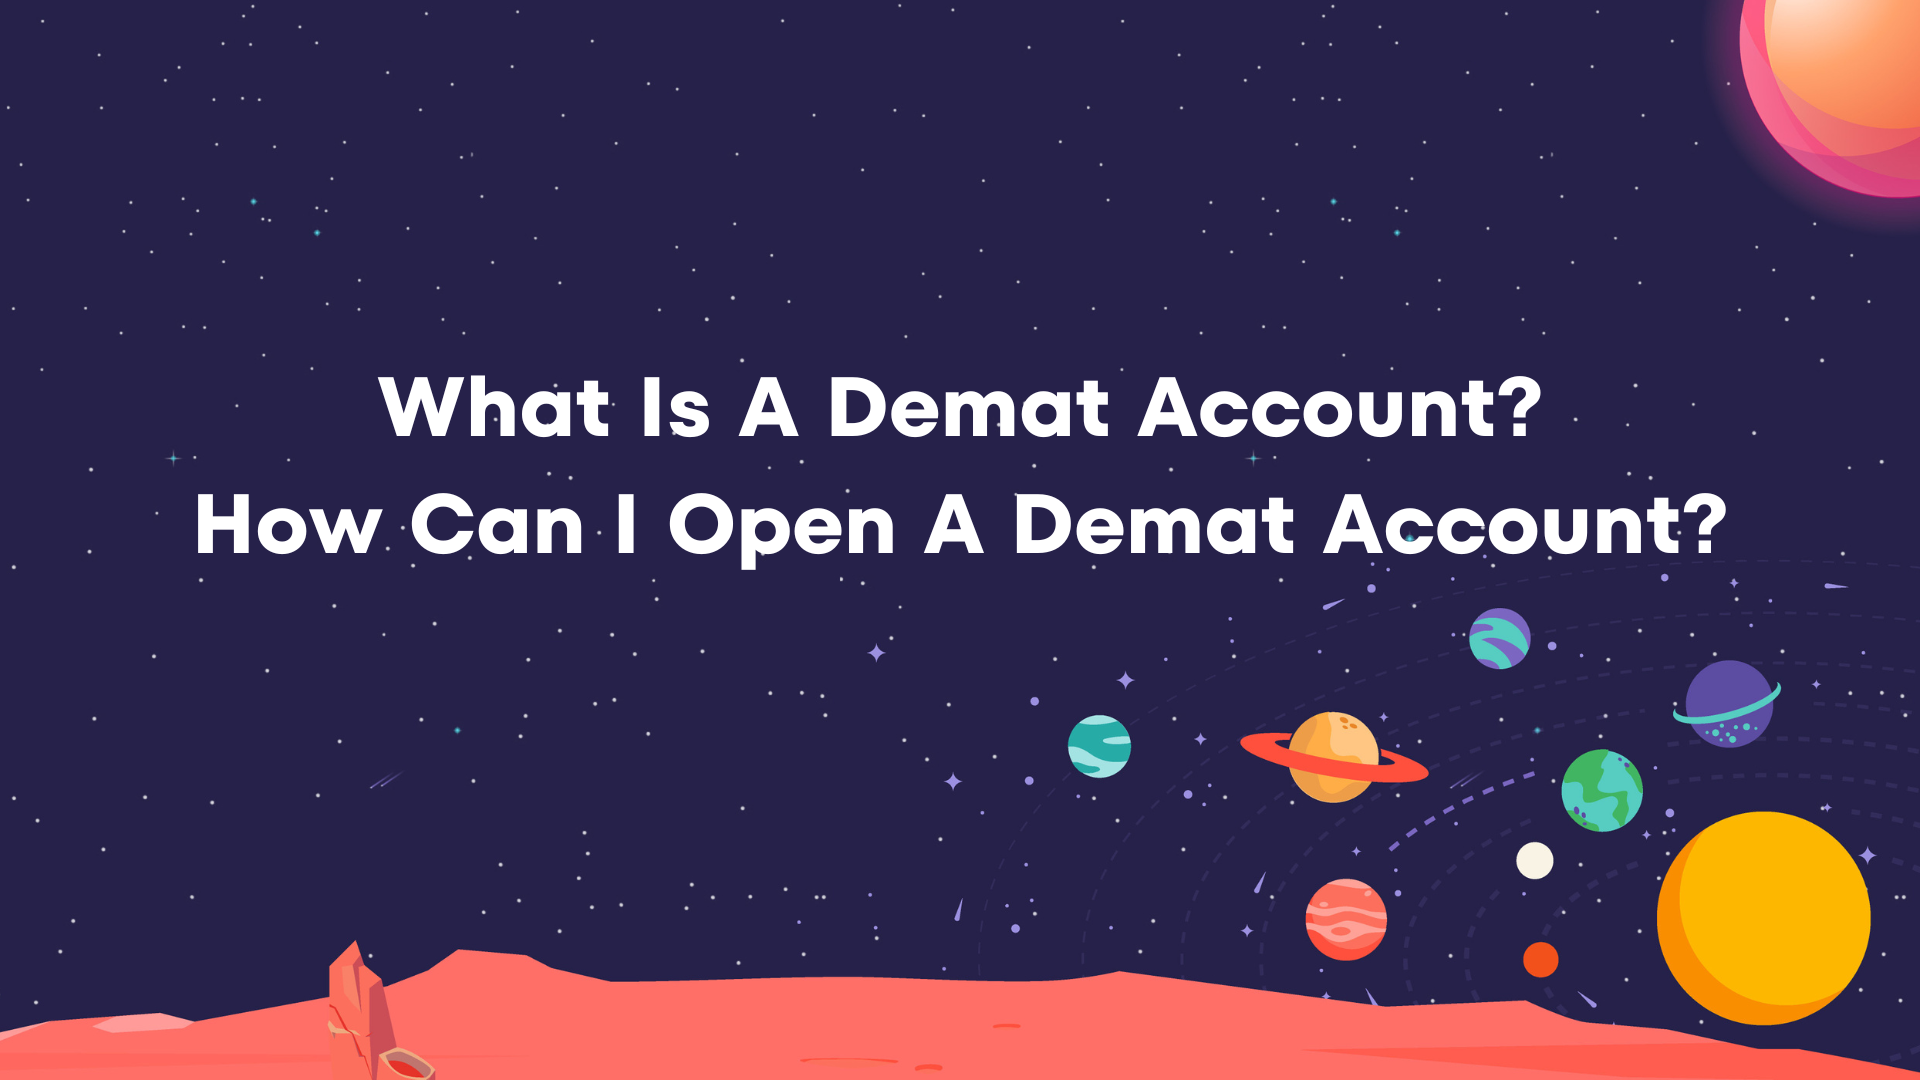 What Is A Demat Account? How To Open One?